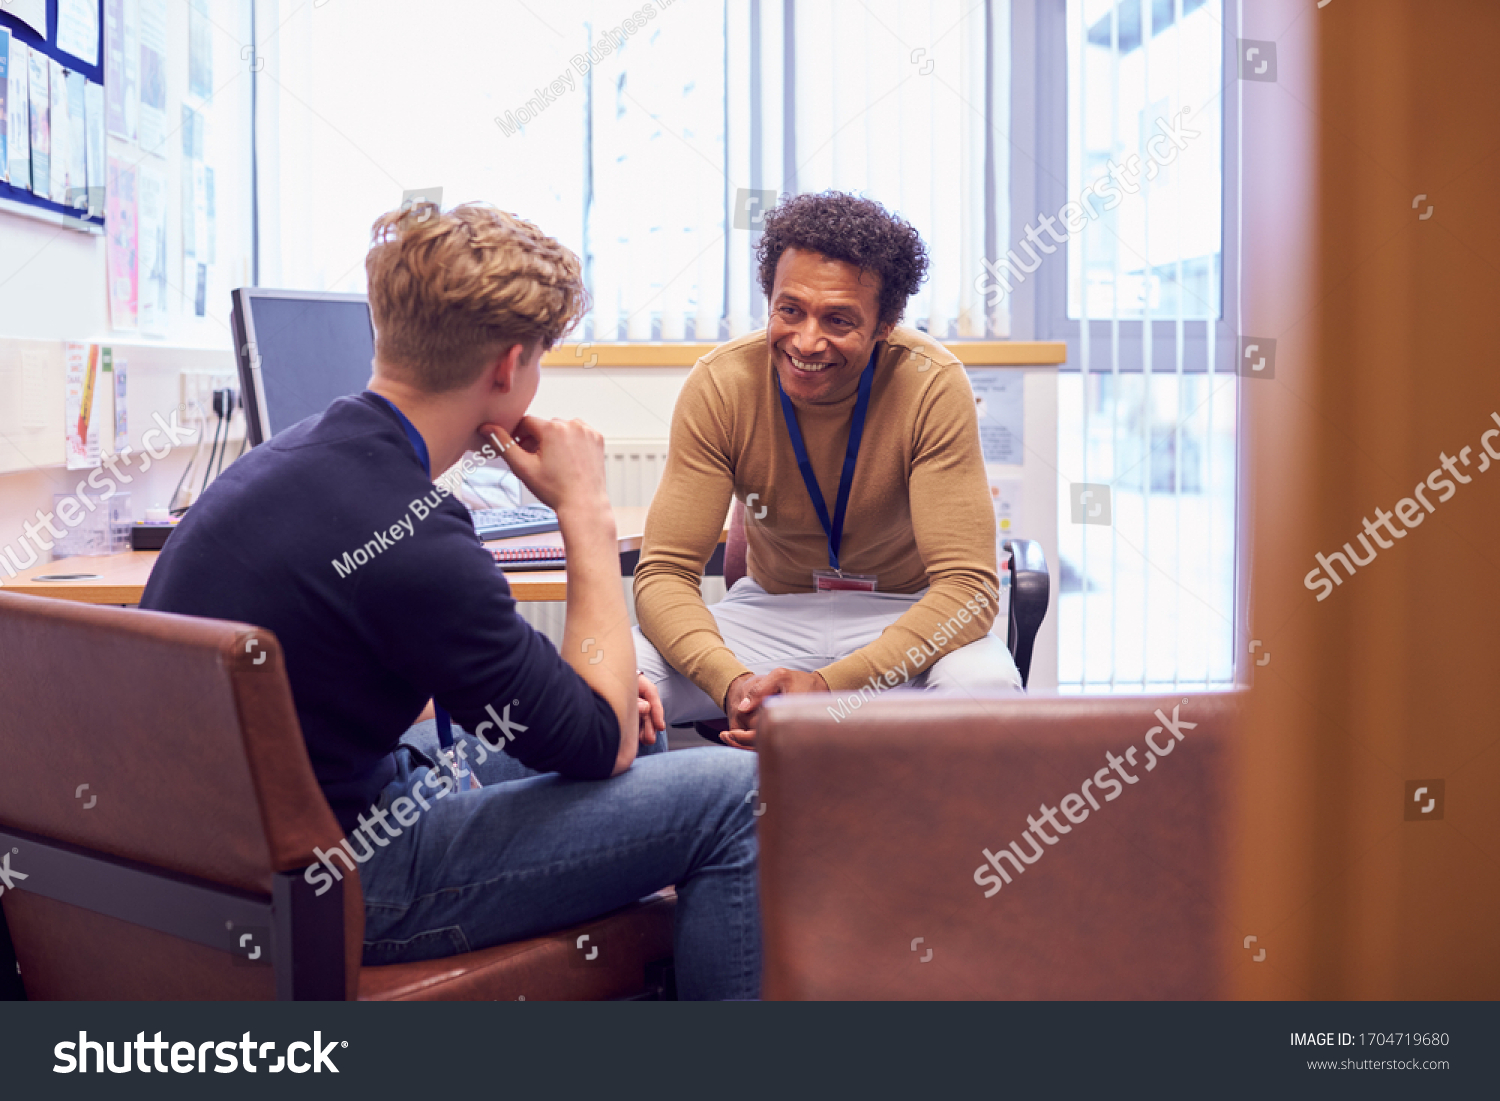 Male College Student Meeting With Campus Counselor Discussing Mental Health Issues #1704719680